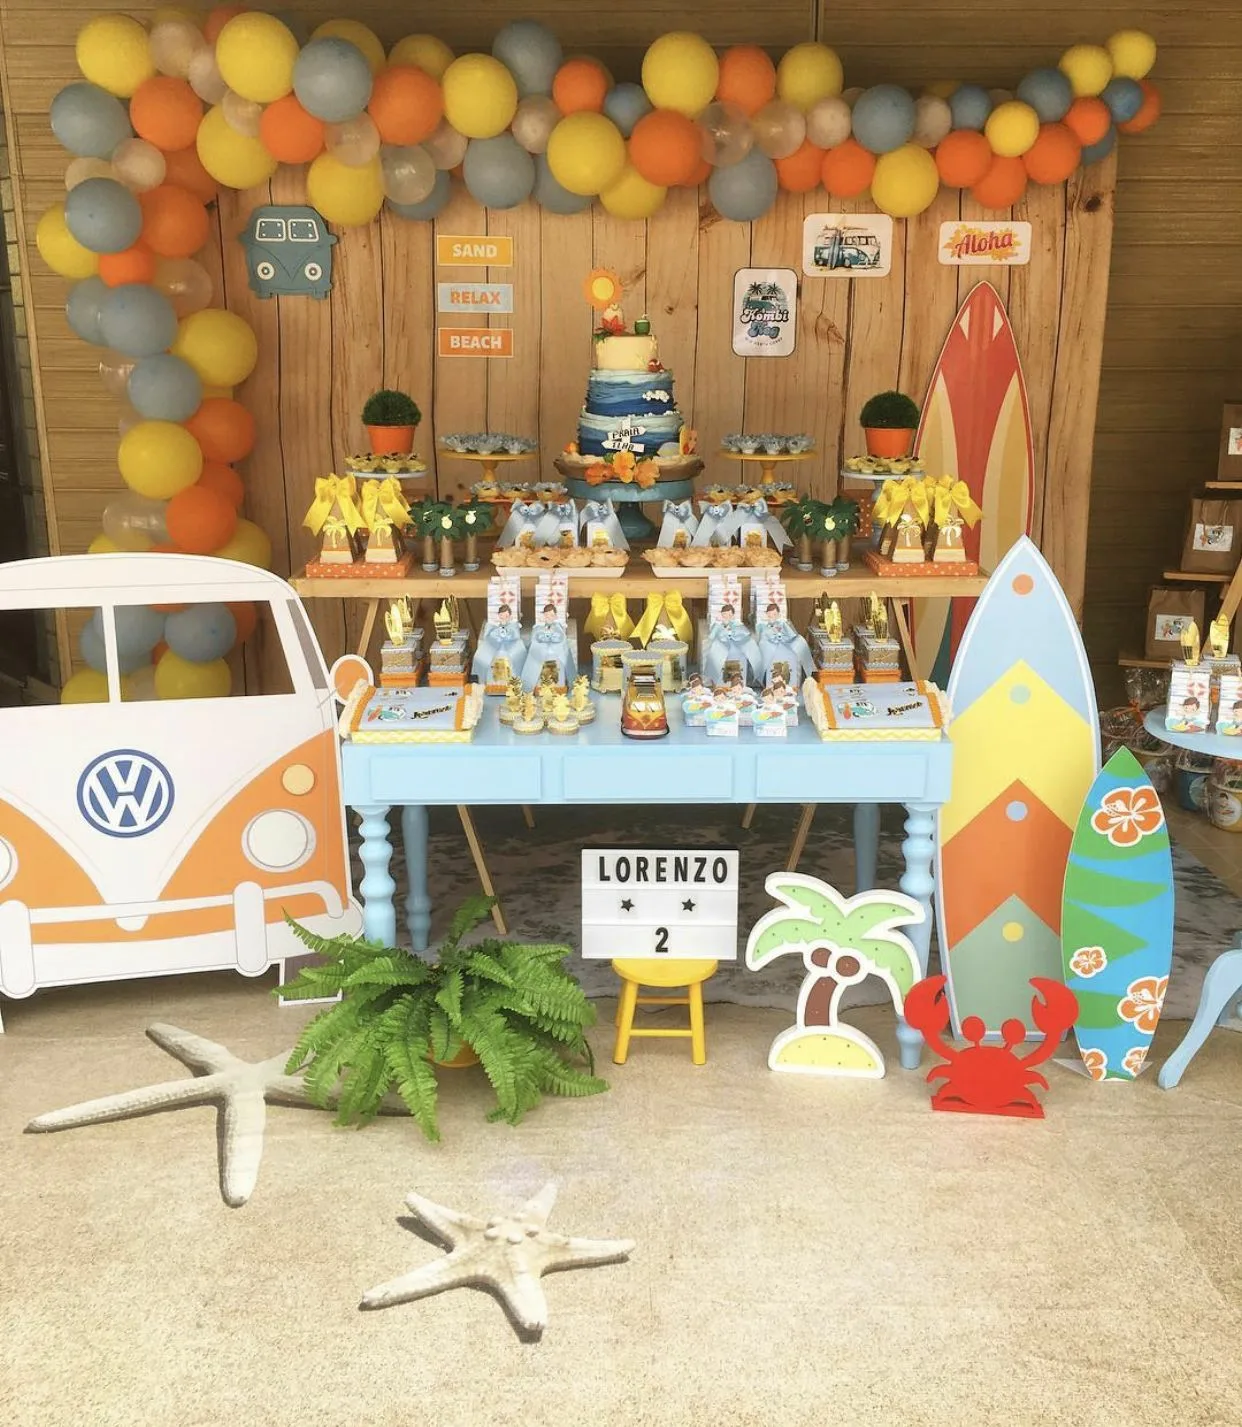 Beach Themed Birthday Cake Table With Wood Background With Surf Board Decors And Balloon